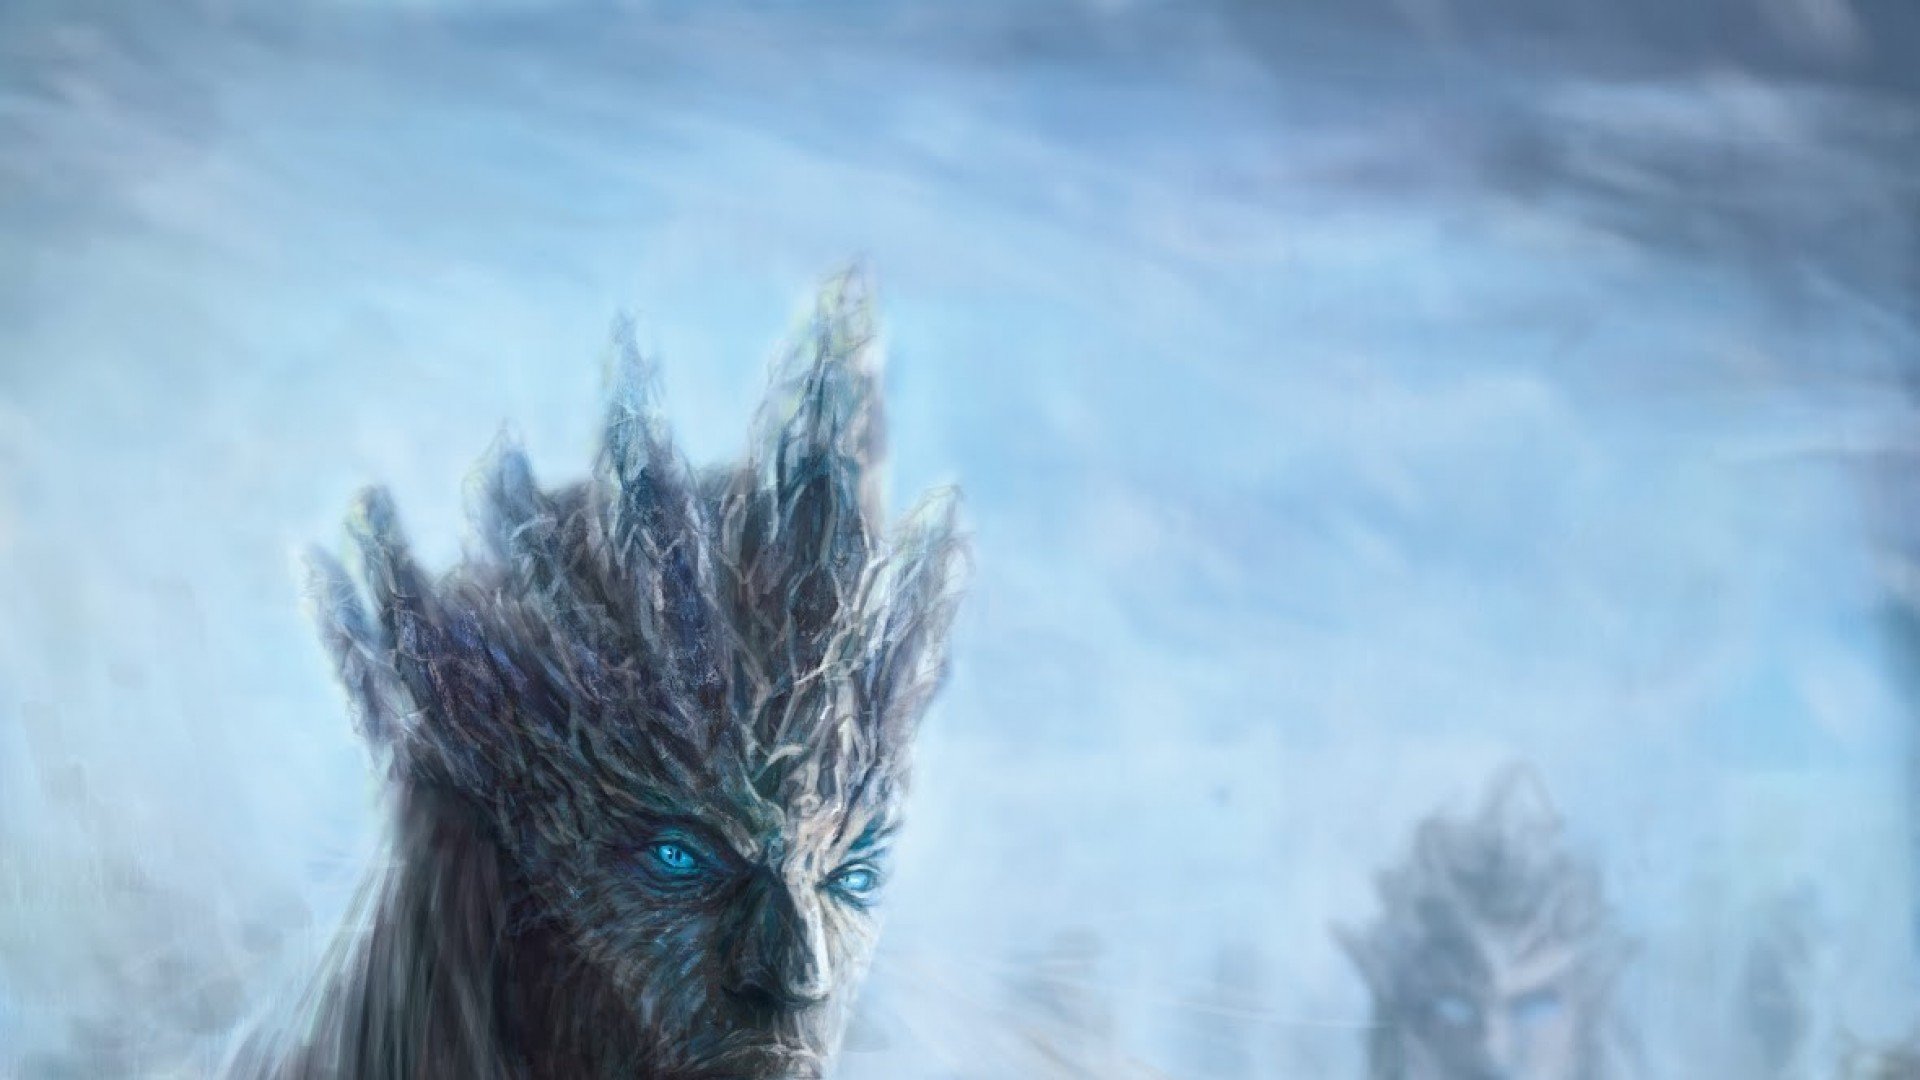 Game of Thrones 1080p   Wallpaper High Definition High Quality 1920x1080